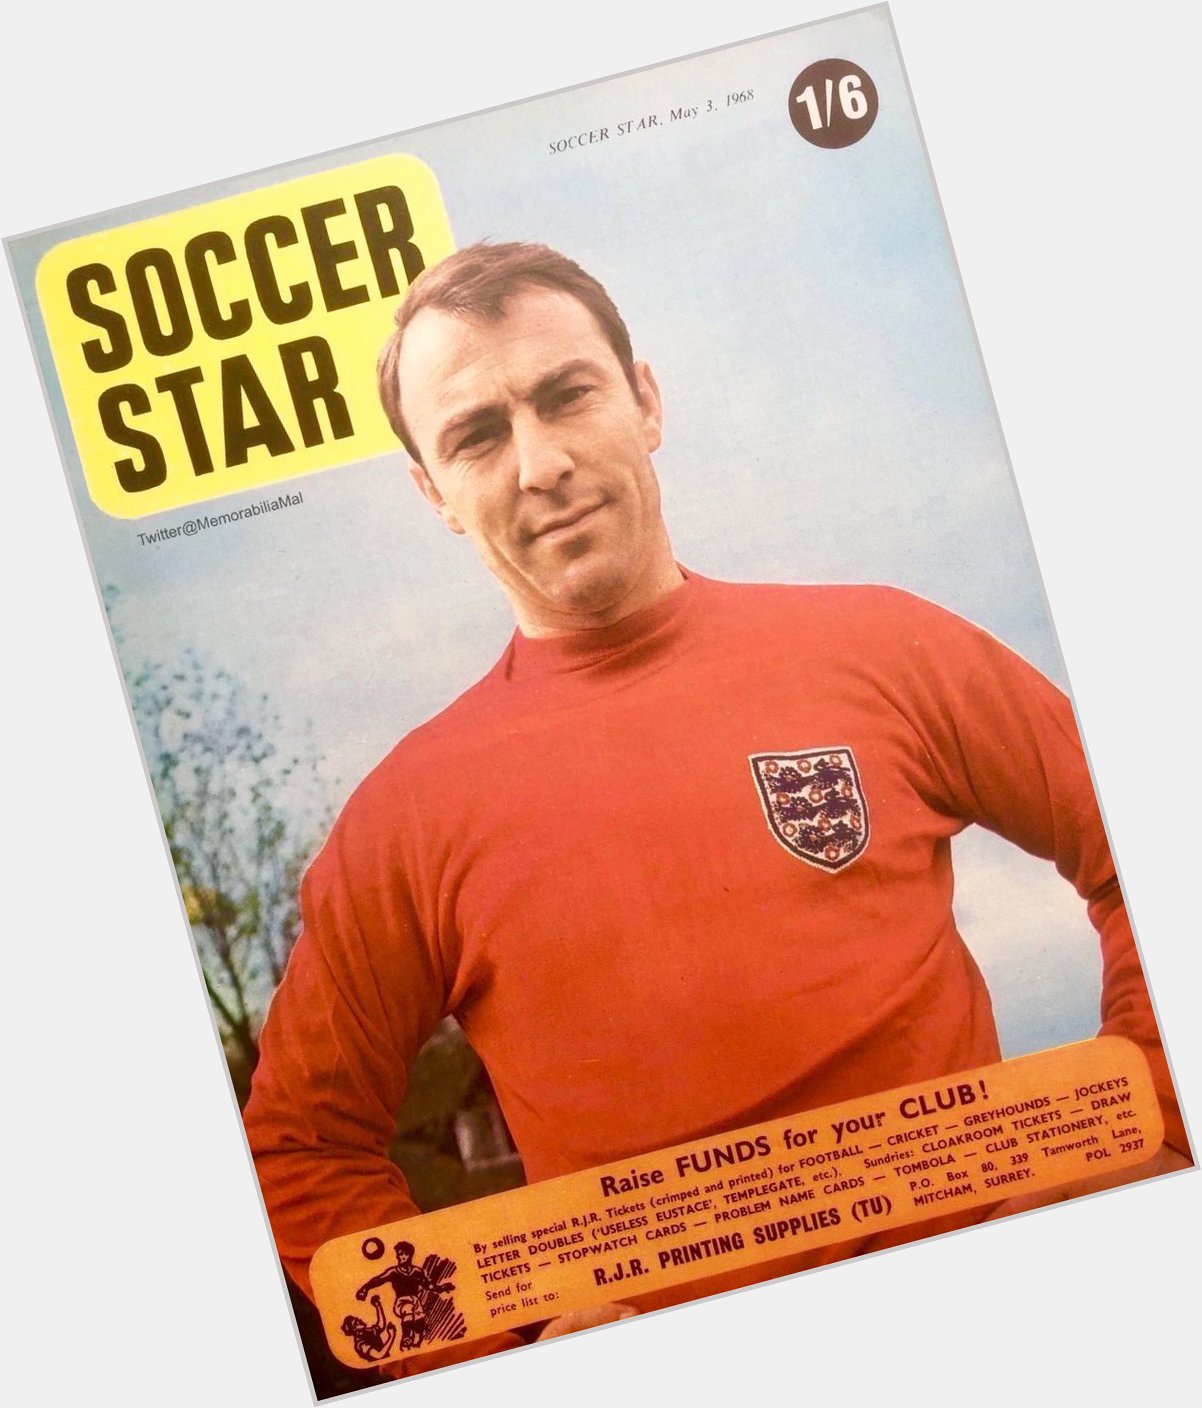 Happy birthday to the magnificent Jimmy Greaves who turns 81 today 